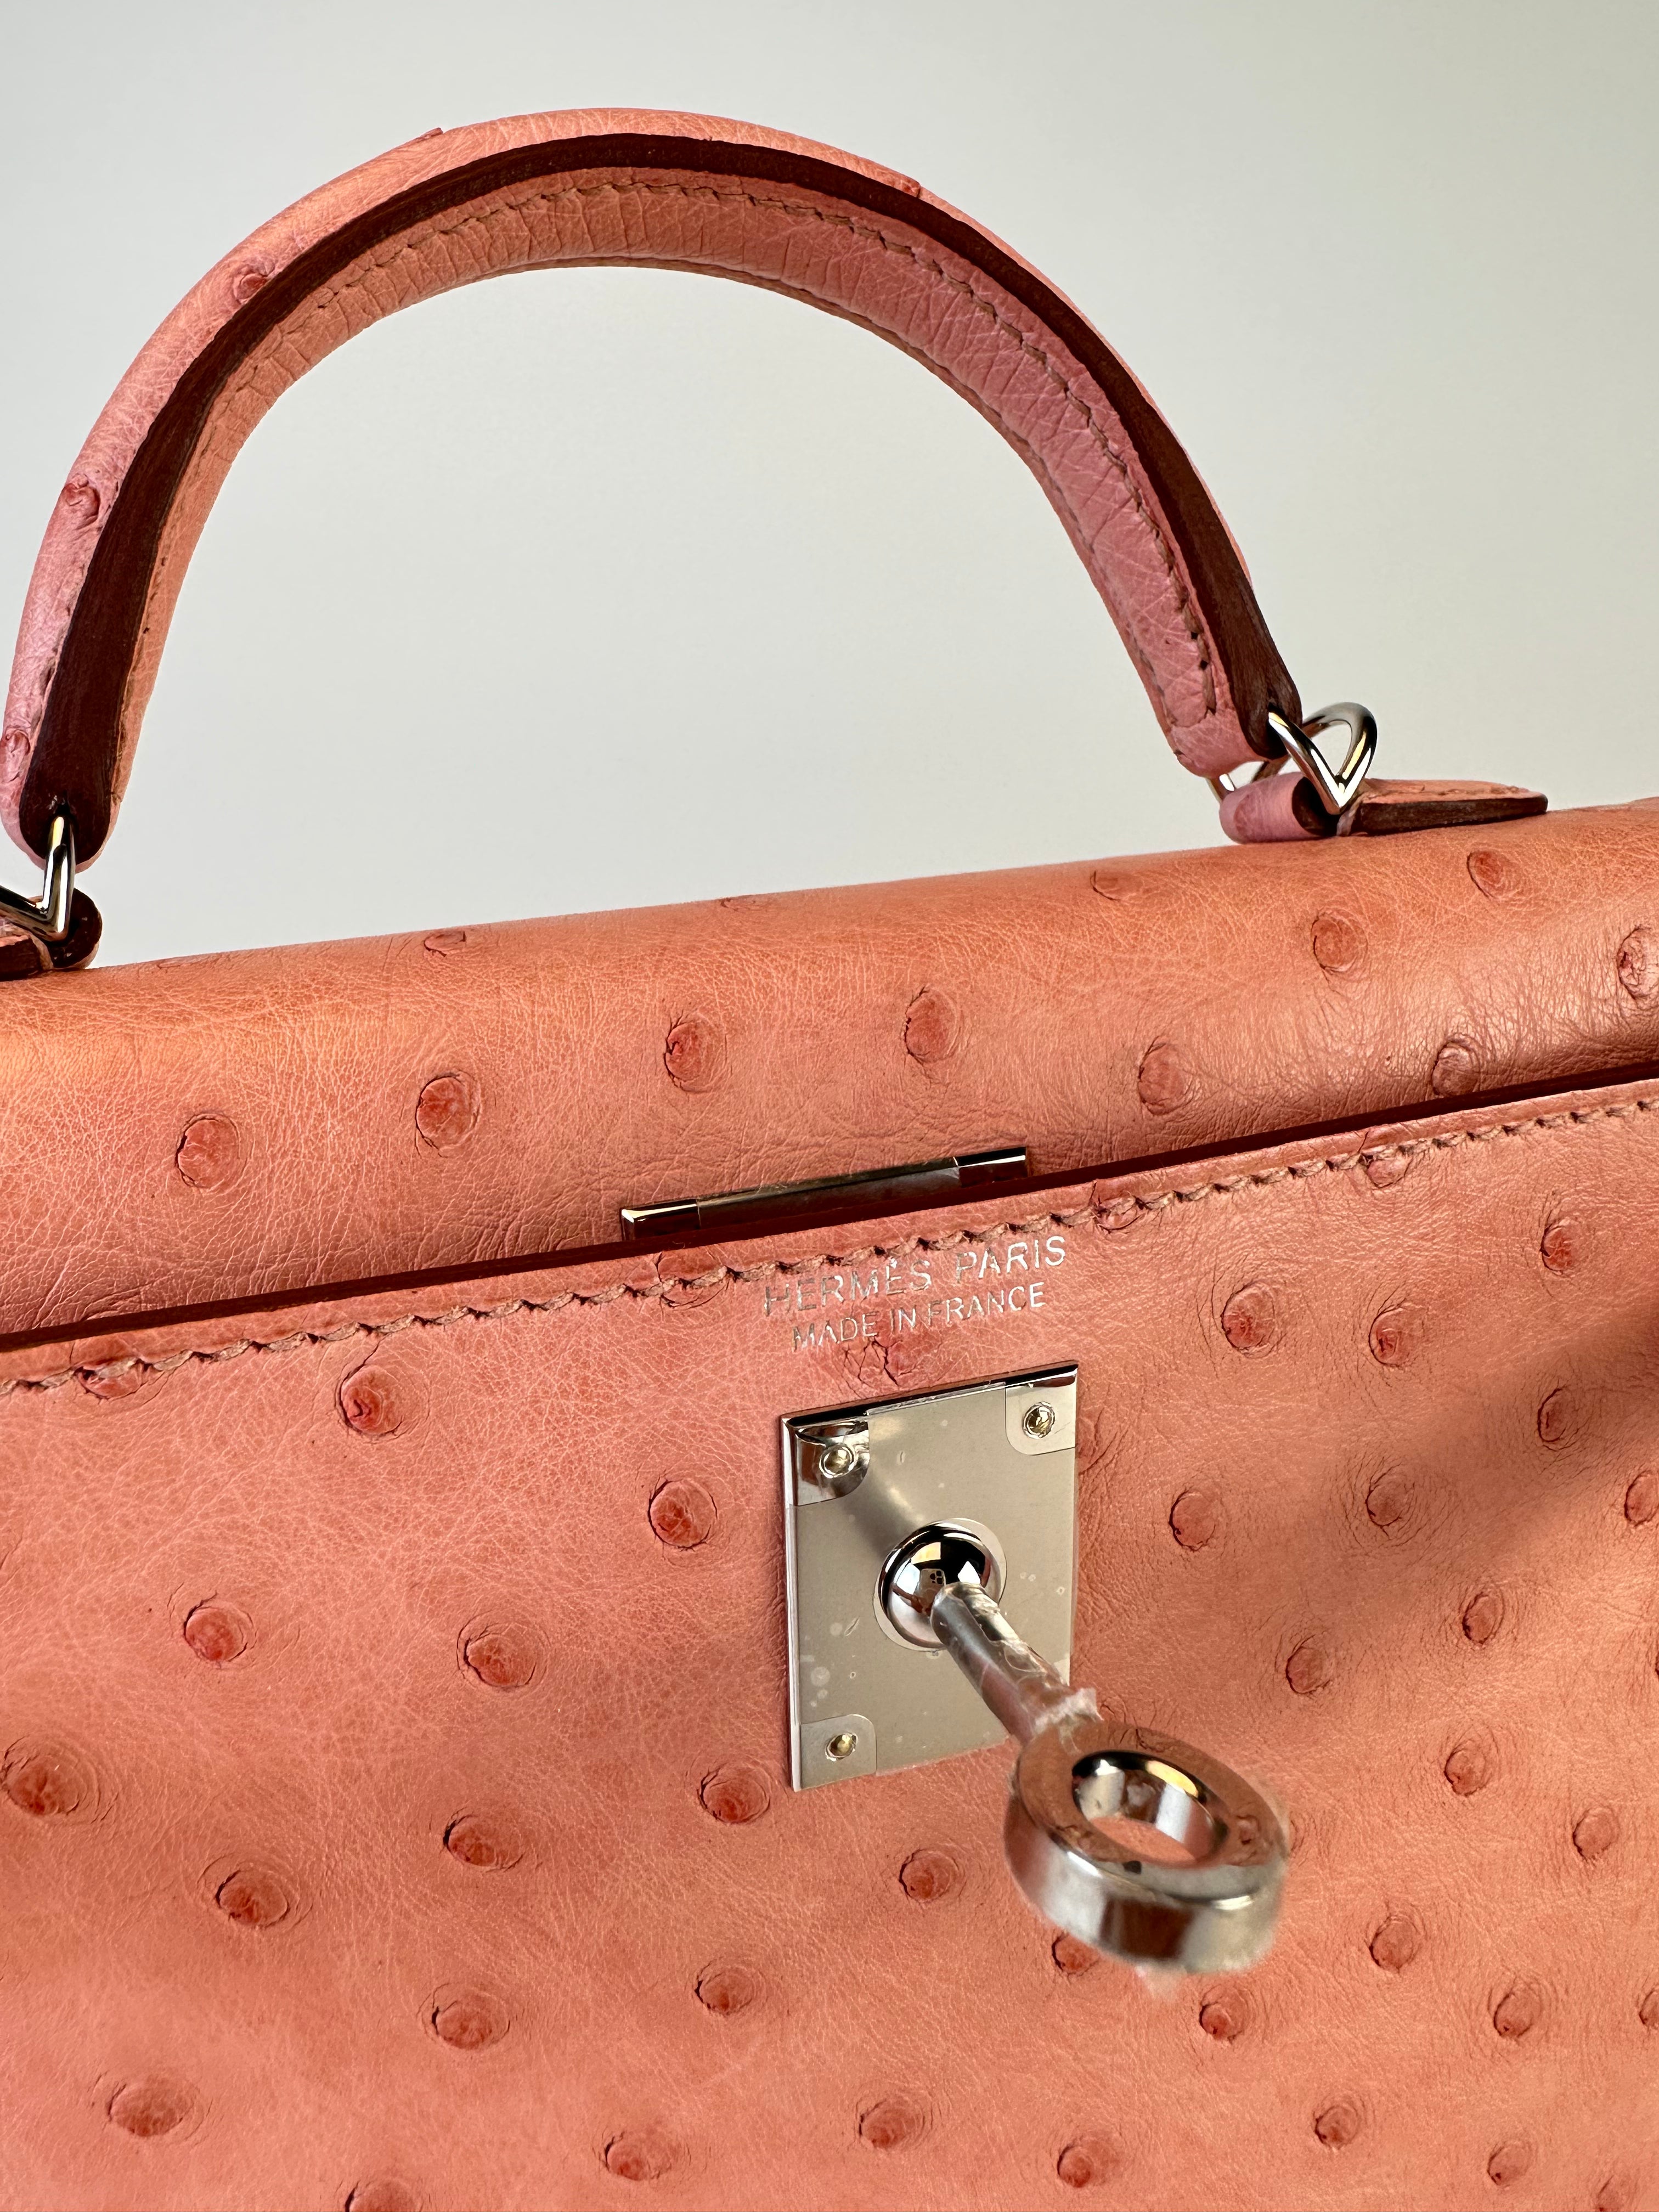 HERMES KELLY 20 OSTRICH SELLIER HANDBAG IN TERRE CUITE WITH PALLADIUM HARDWARE front close up